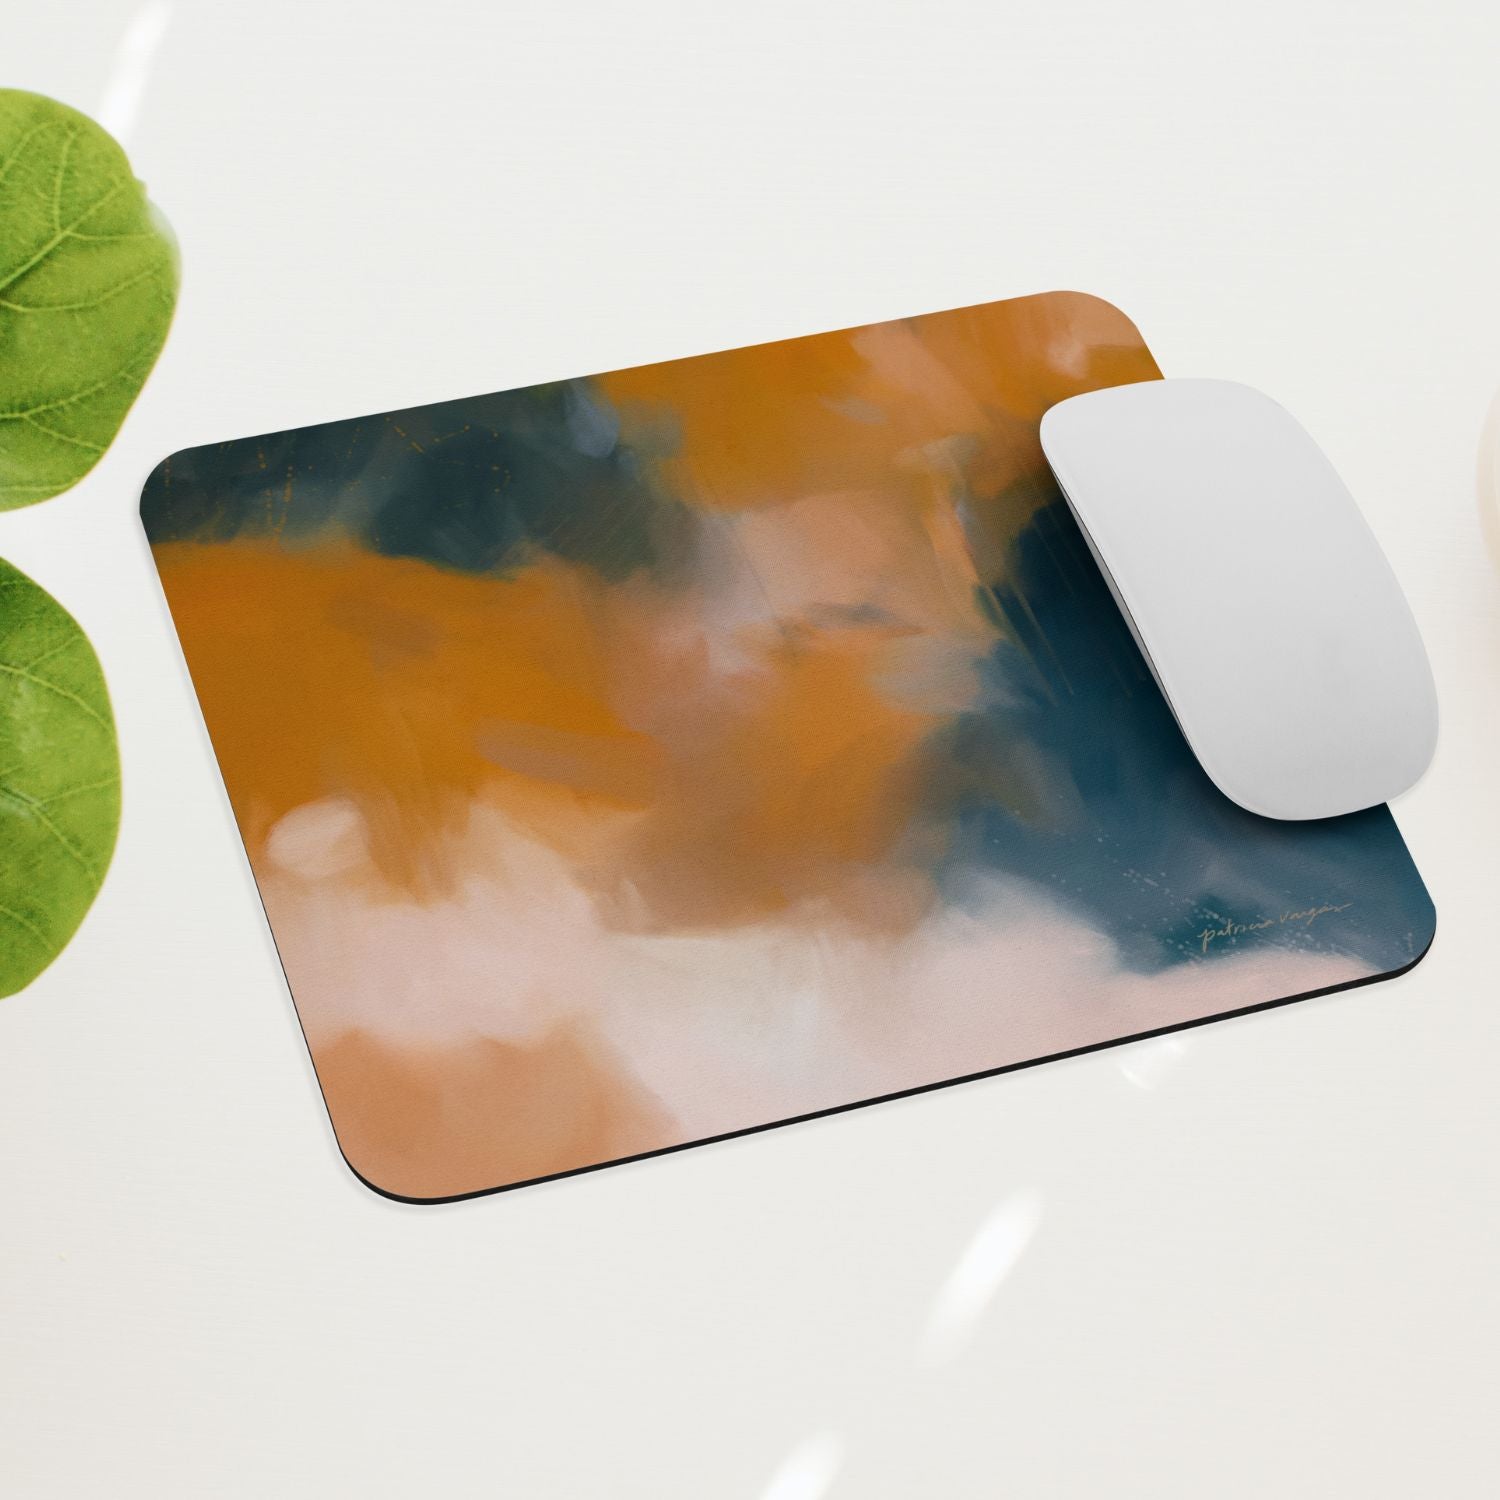 Amelie, blue and orange mouse pad for styling your office desk. Featuring artwork by Parima Studio. Home office styling accessories, cubicle styling accessories.